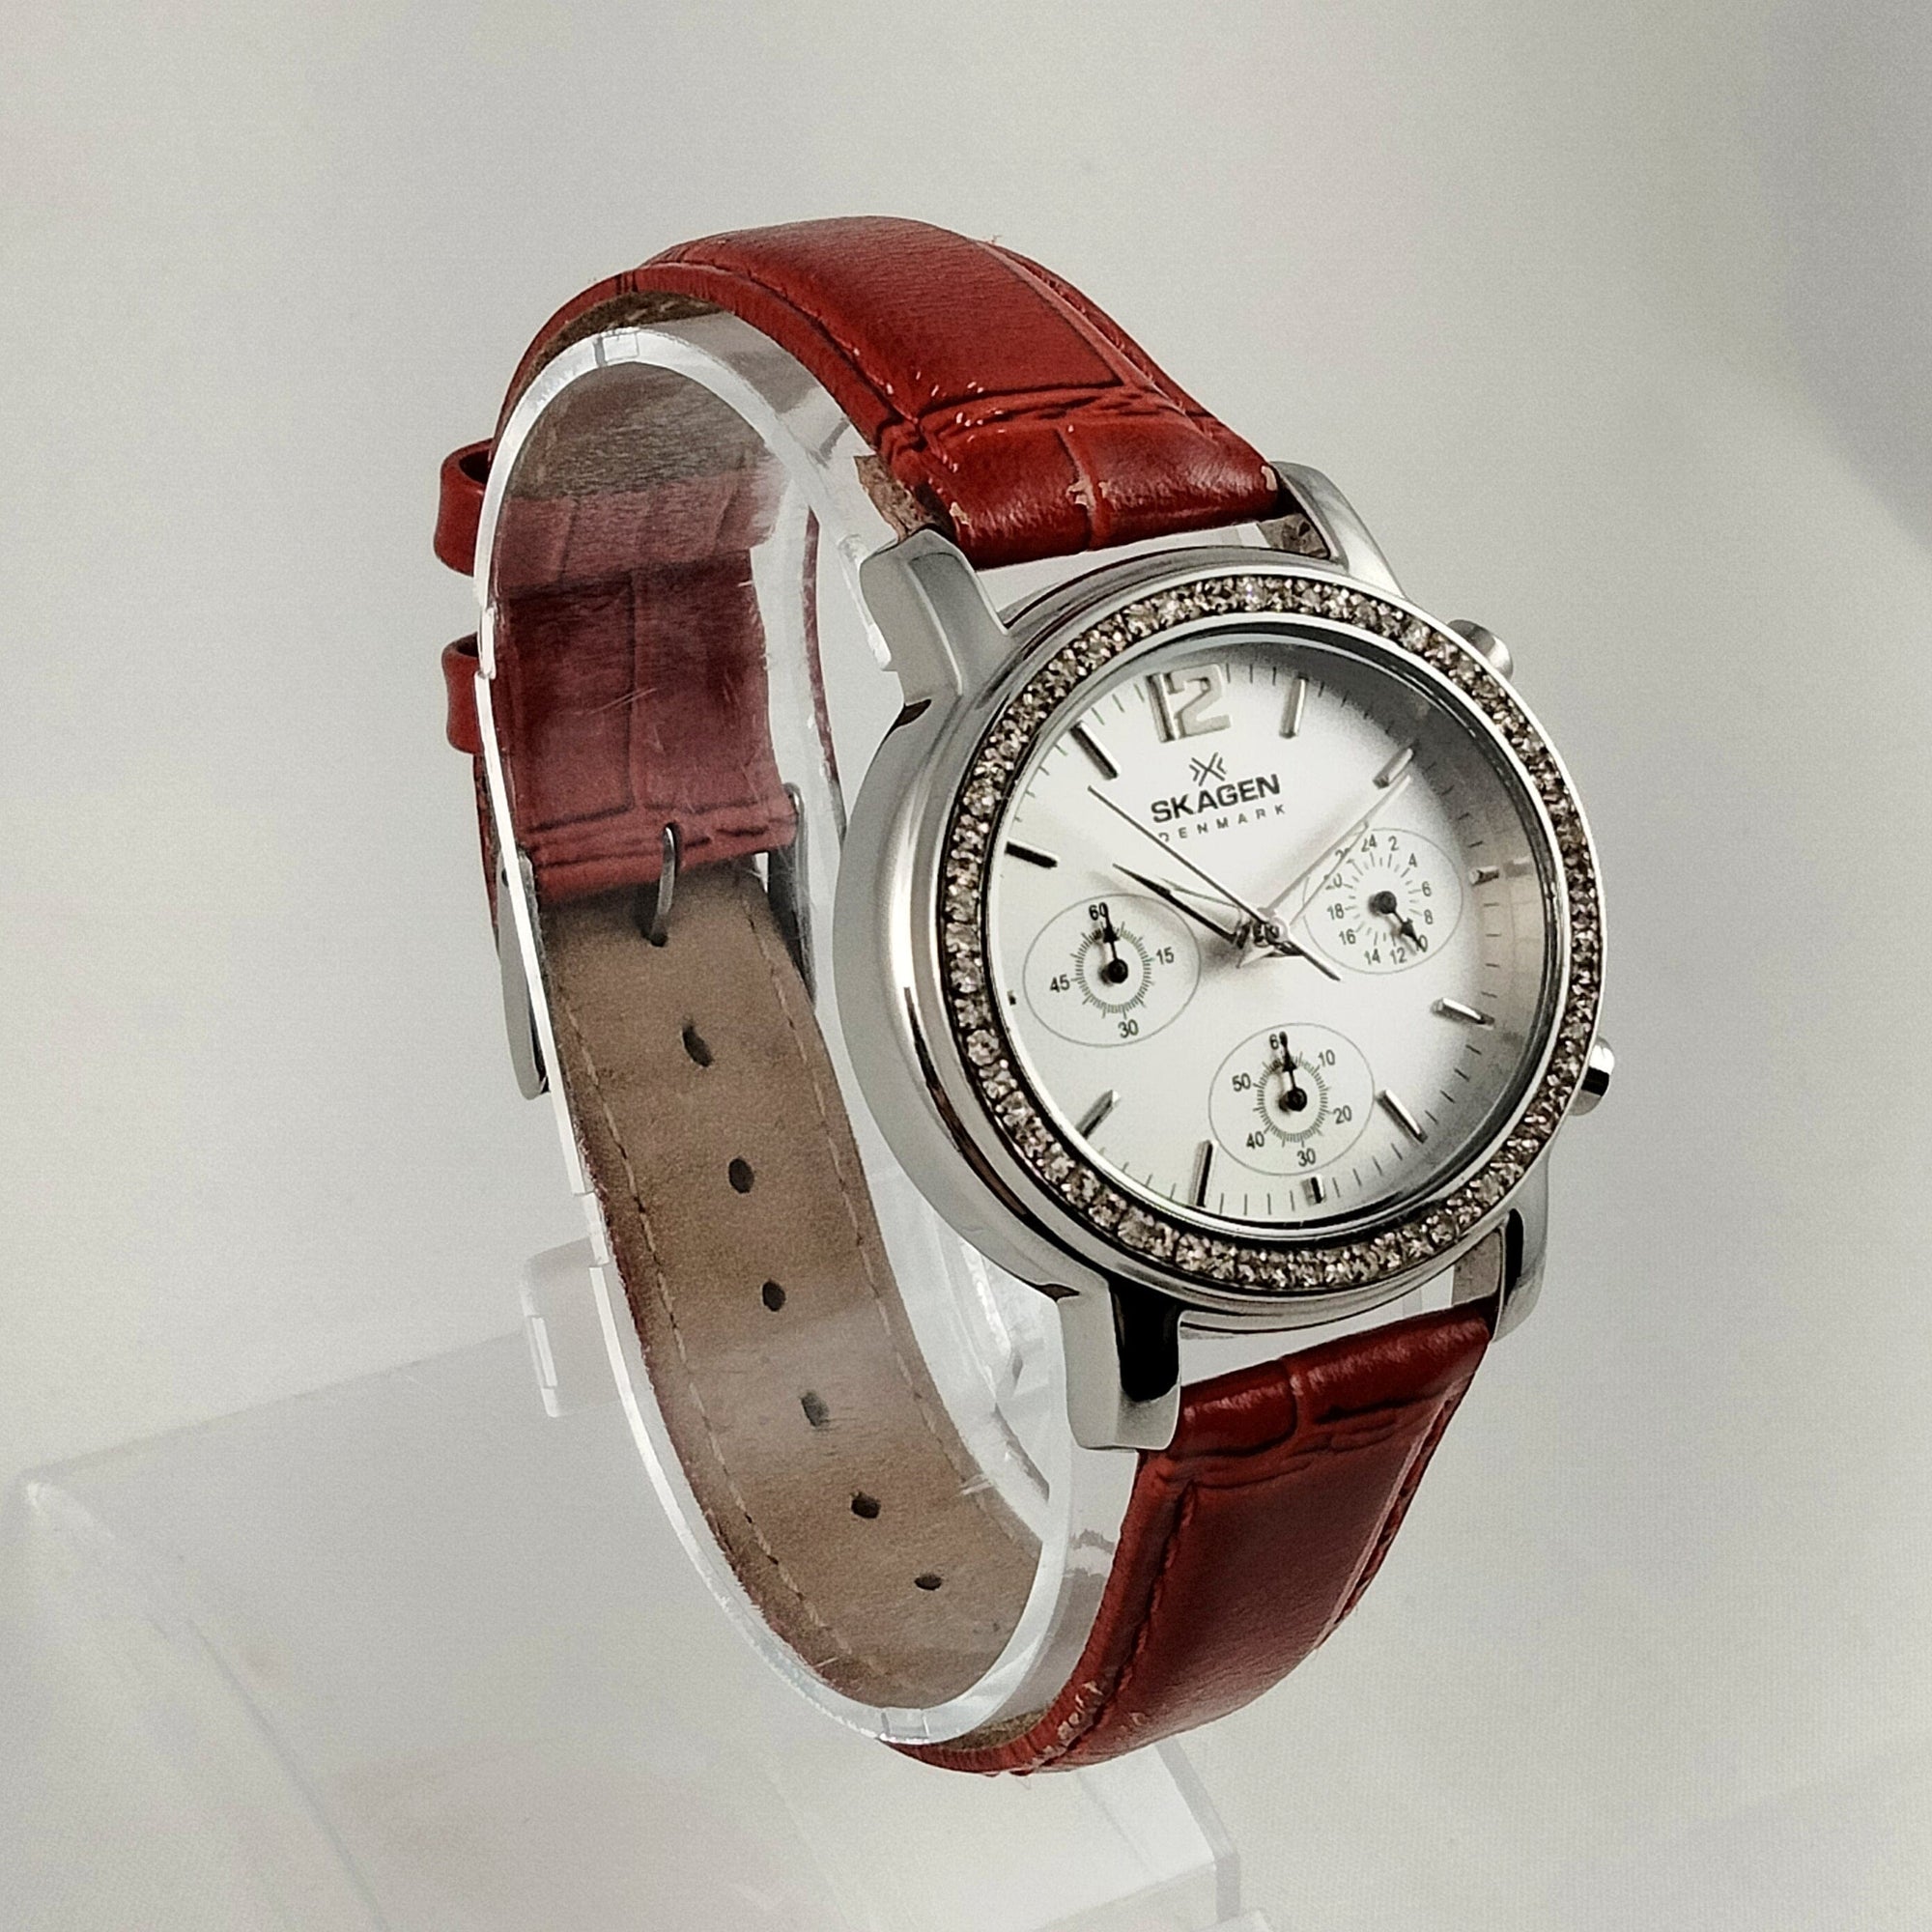 I Like Mikes Mid Century Modern Watches Skagen Women's Stainless Steel Chronograph Watch, Jewel Framed Face, Red Genuine Leather Strap